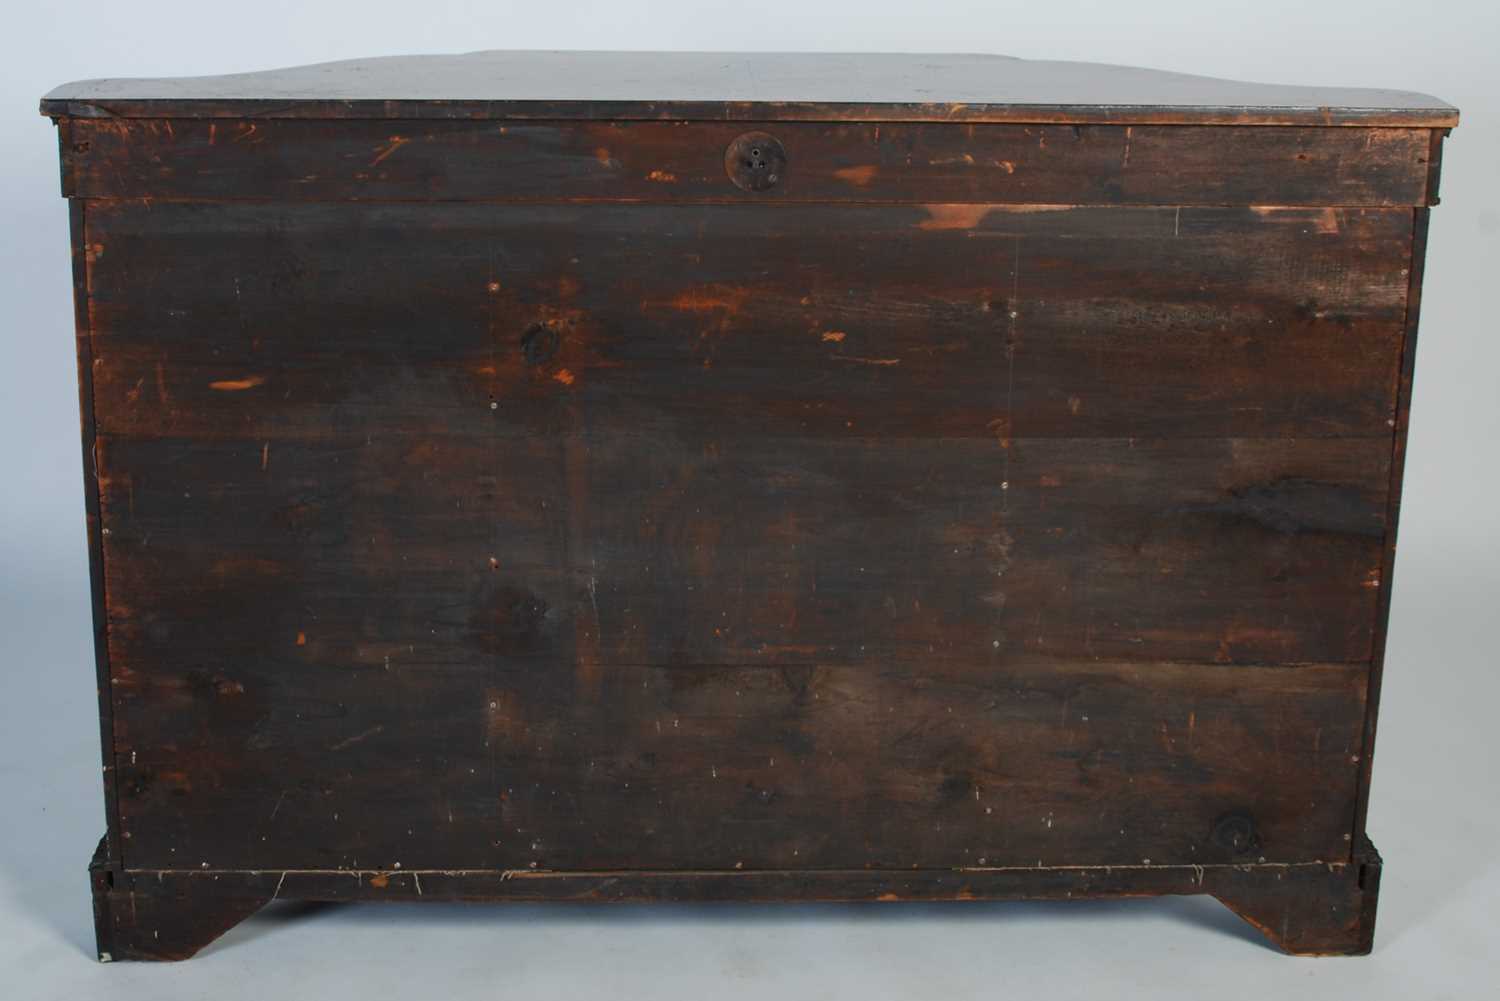 A 19th century walnut, marquetry and gilt metal mounted credenza, the shaped top above a plain - Image 6 of 6